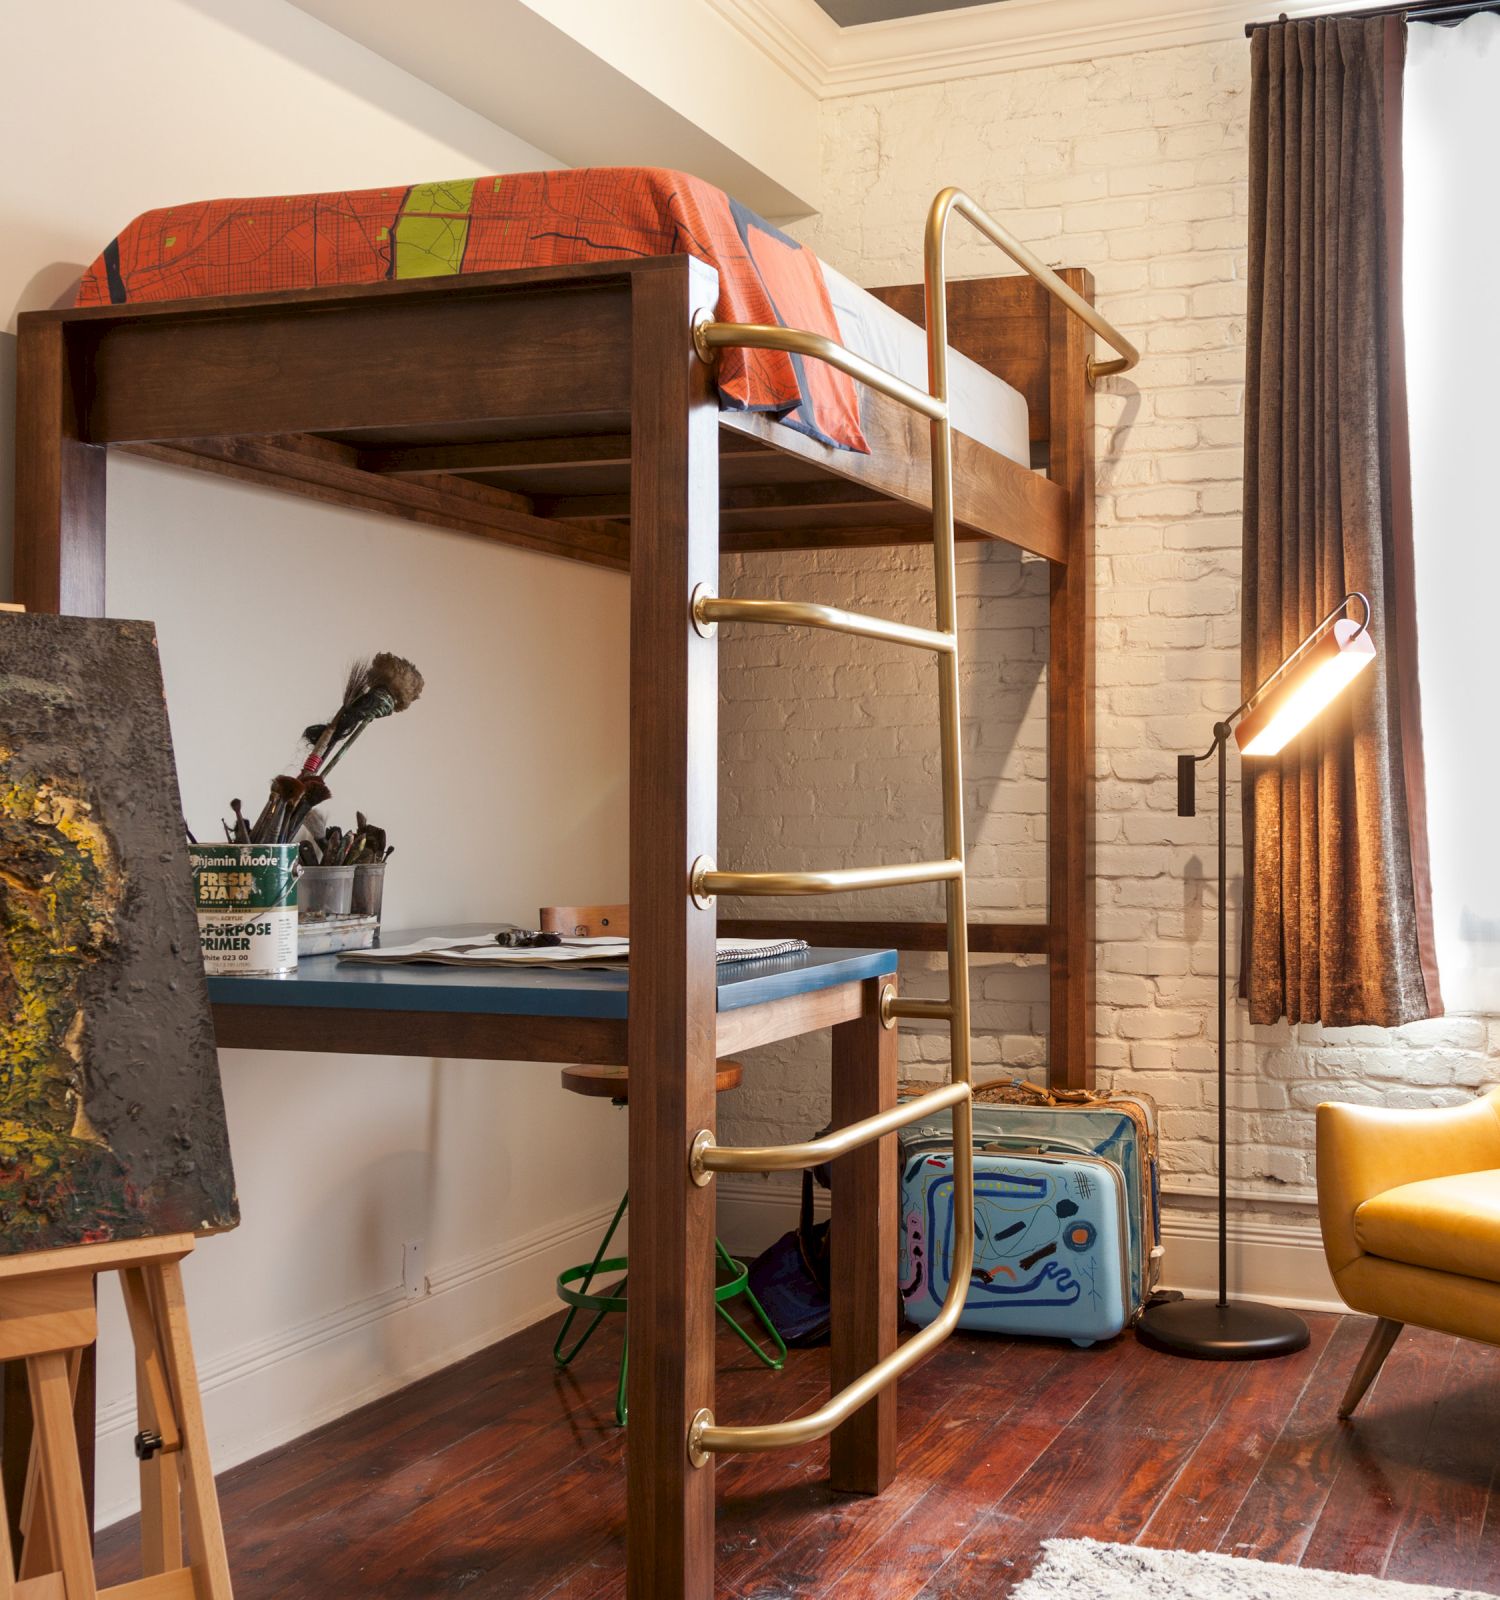 The image shows a room with a loft bed, a desk below, an easel with a painting, a yellow chair, a floor lamp, and a window with curtains.